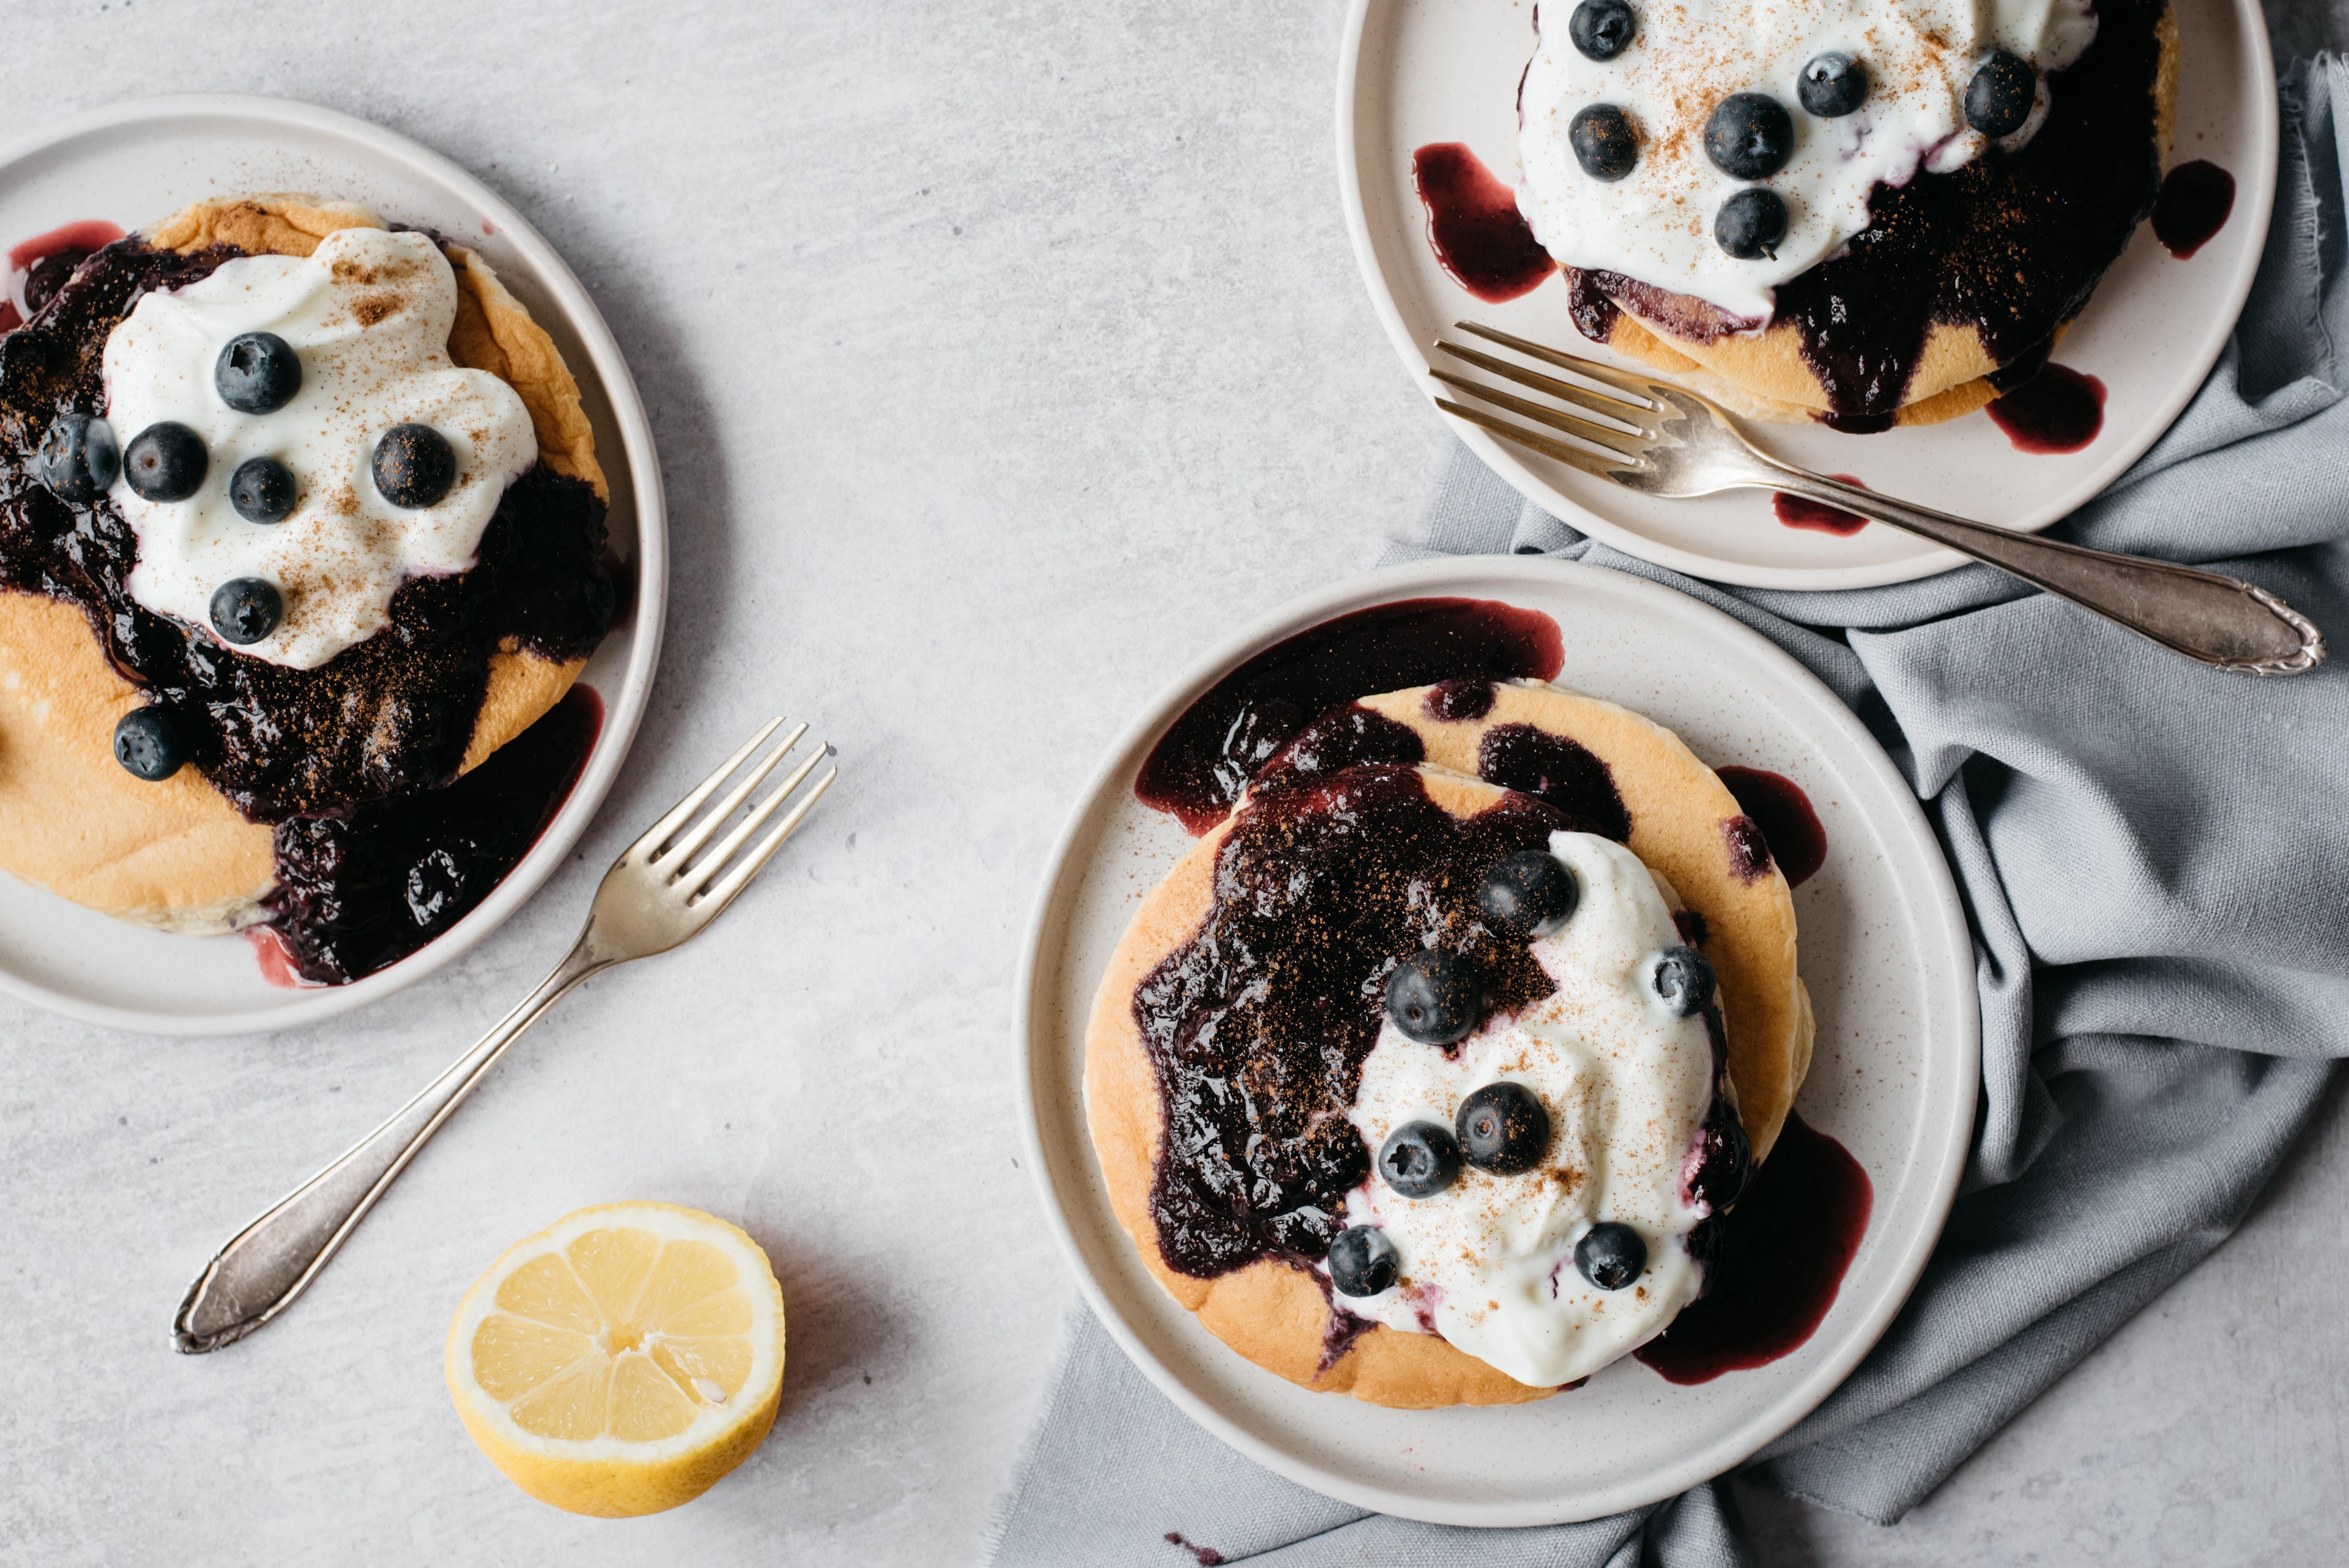 Top view of Cinnamon Pancakes with Blueberry Compote topped with yoghurt, blueberries and slice lemon